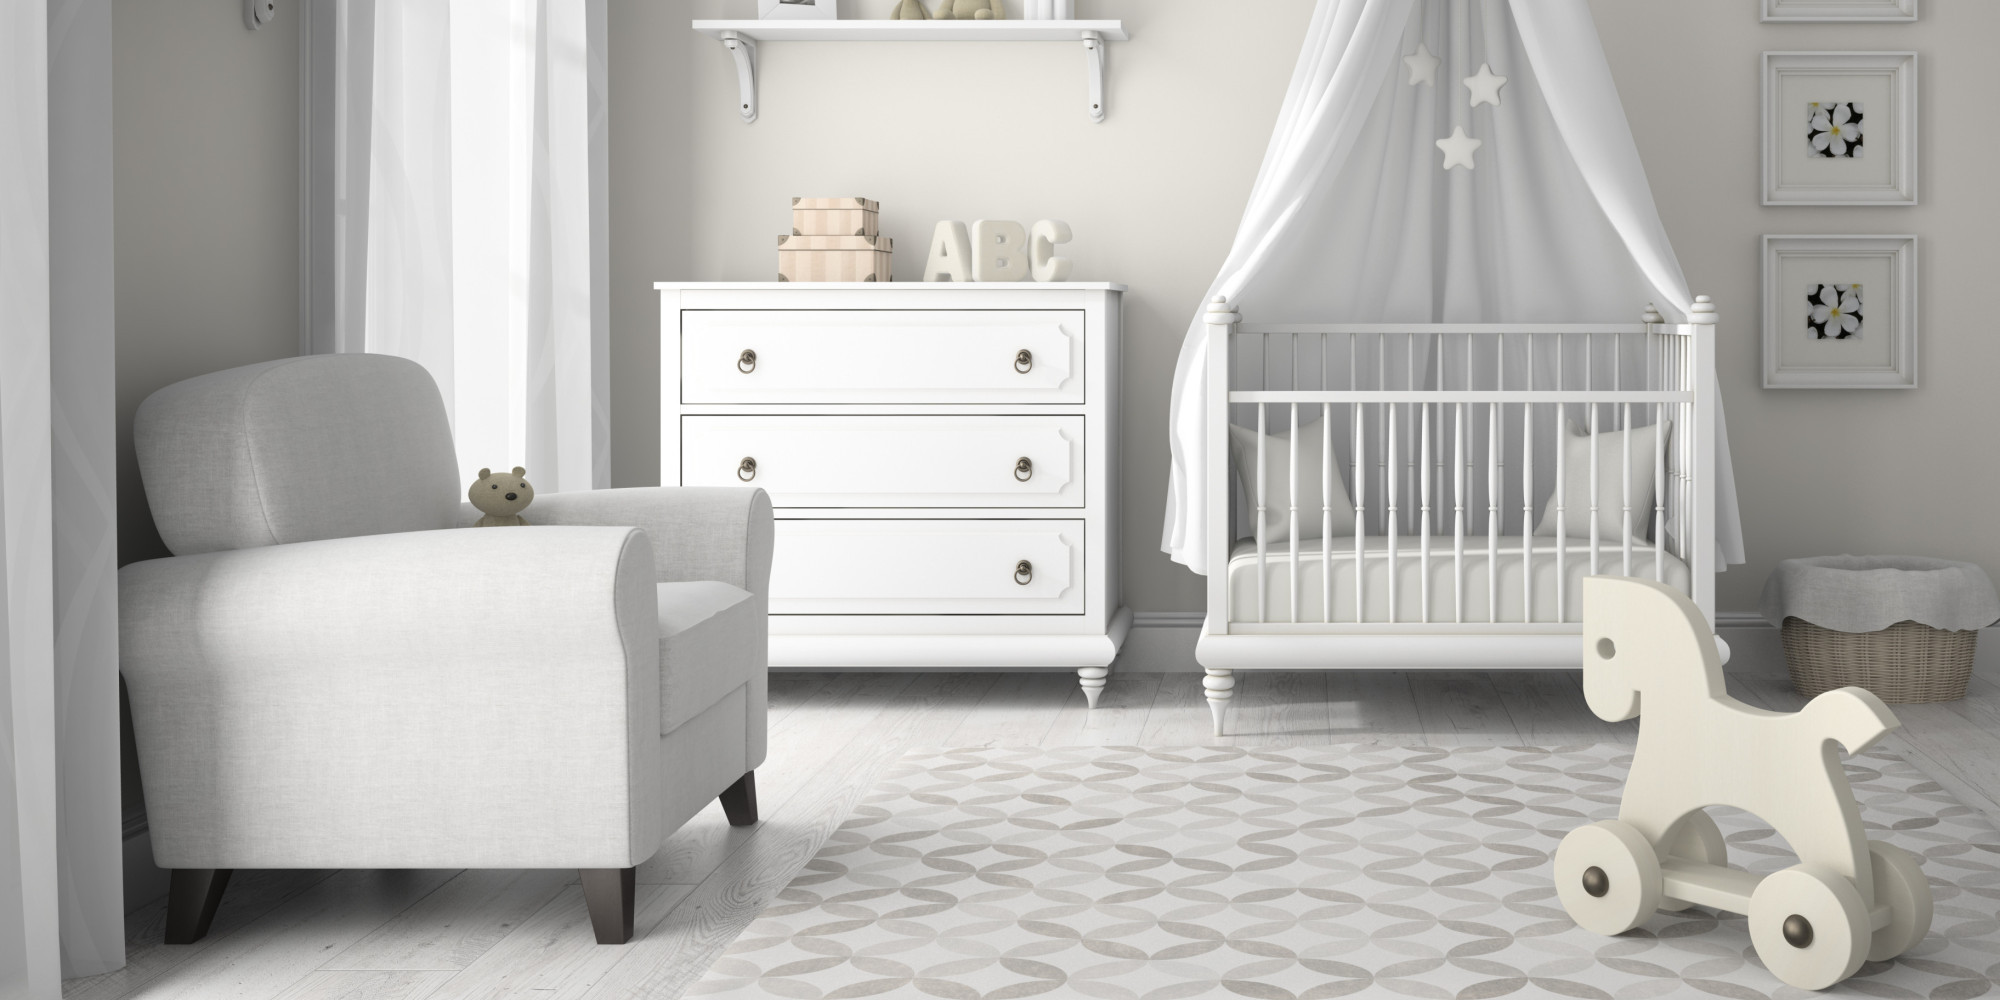 Baby Room Decoration
 How To Decorate Your Baby s Nursery In A Day